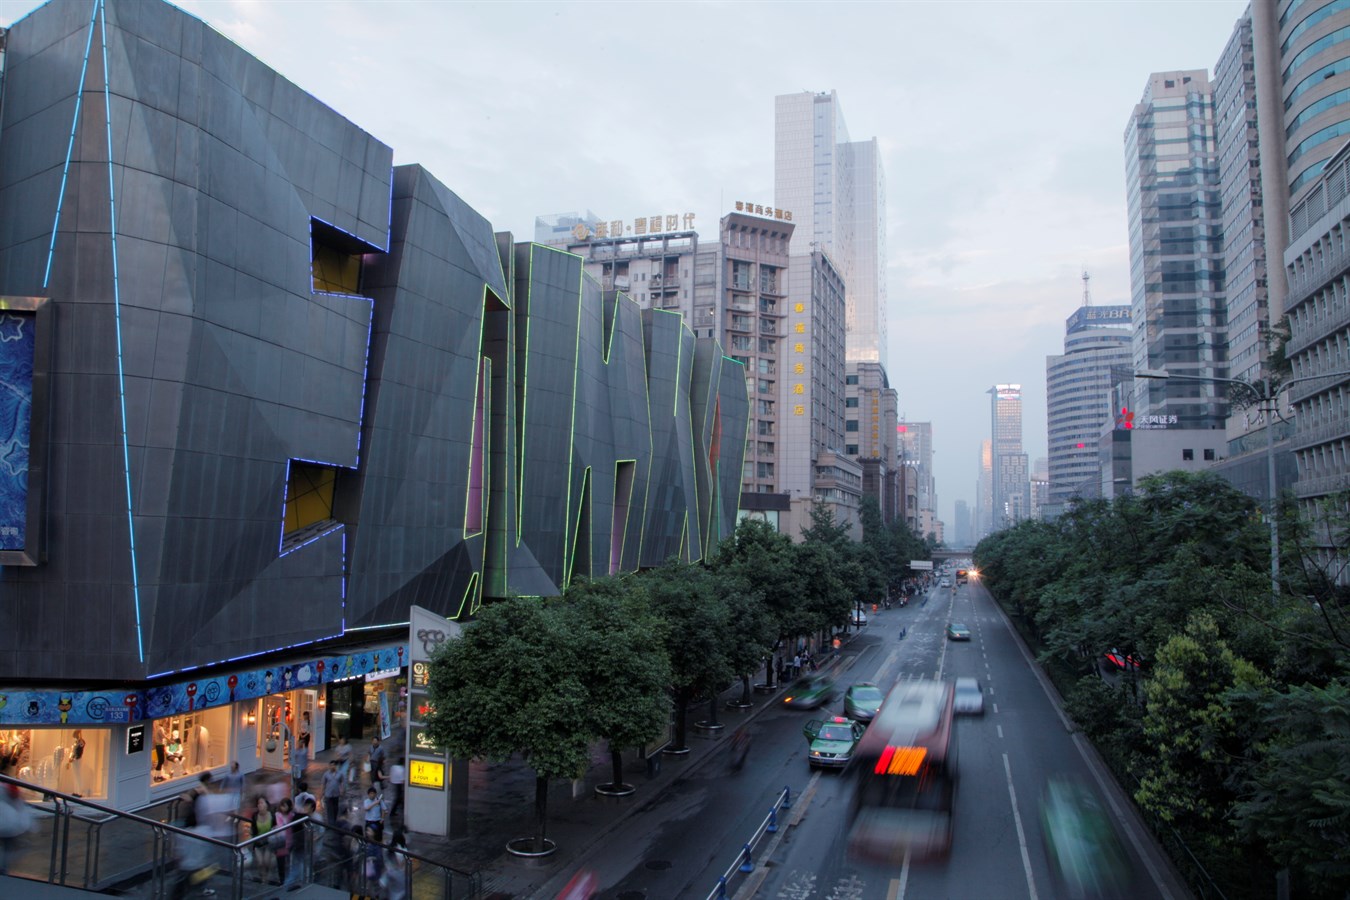 The city of Chengdu, downtown